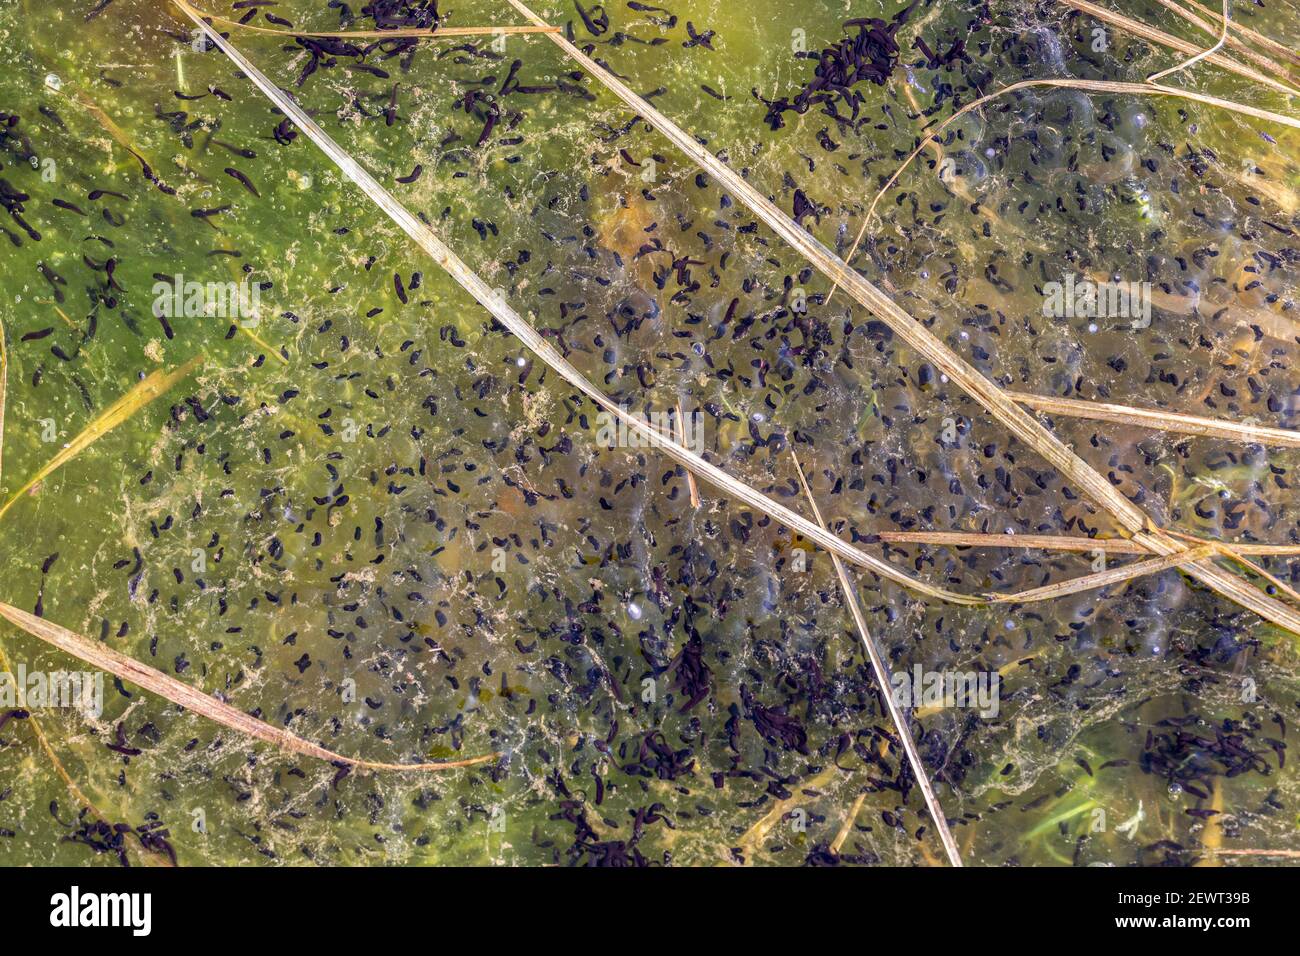 Clusters of tadpoles growing in a stagnant puddle, County Kerry, Ireland Stock Photo